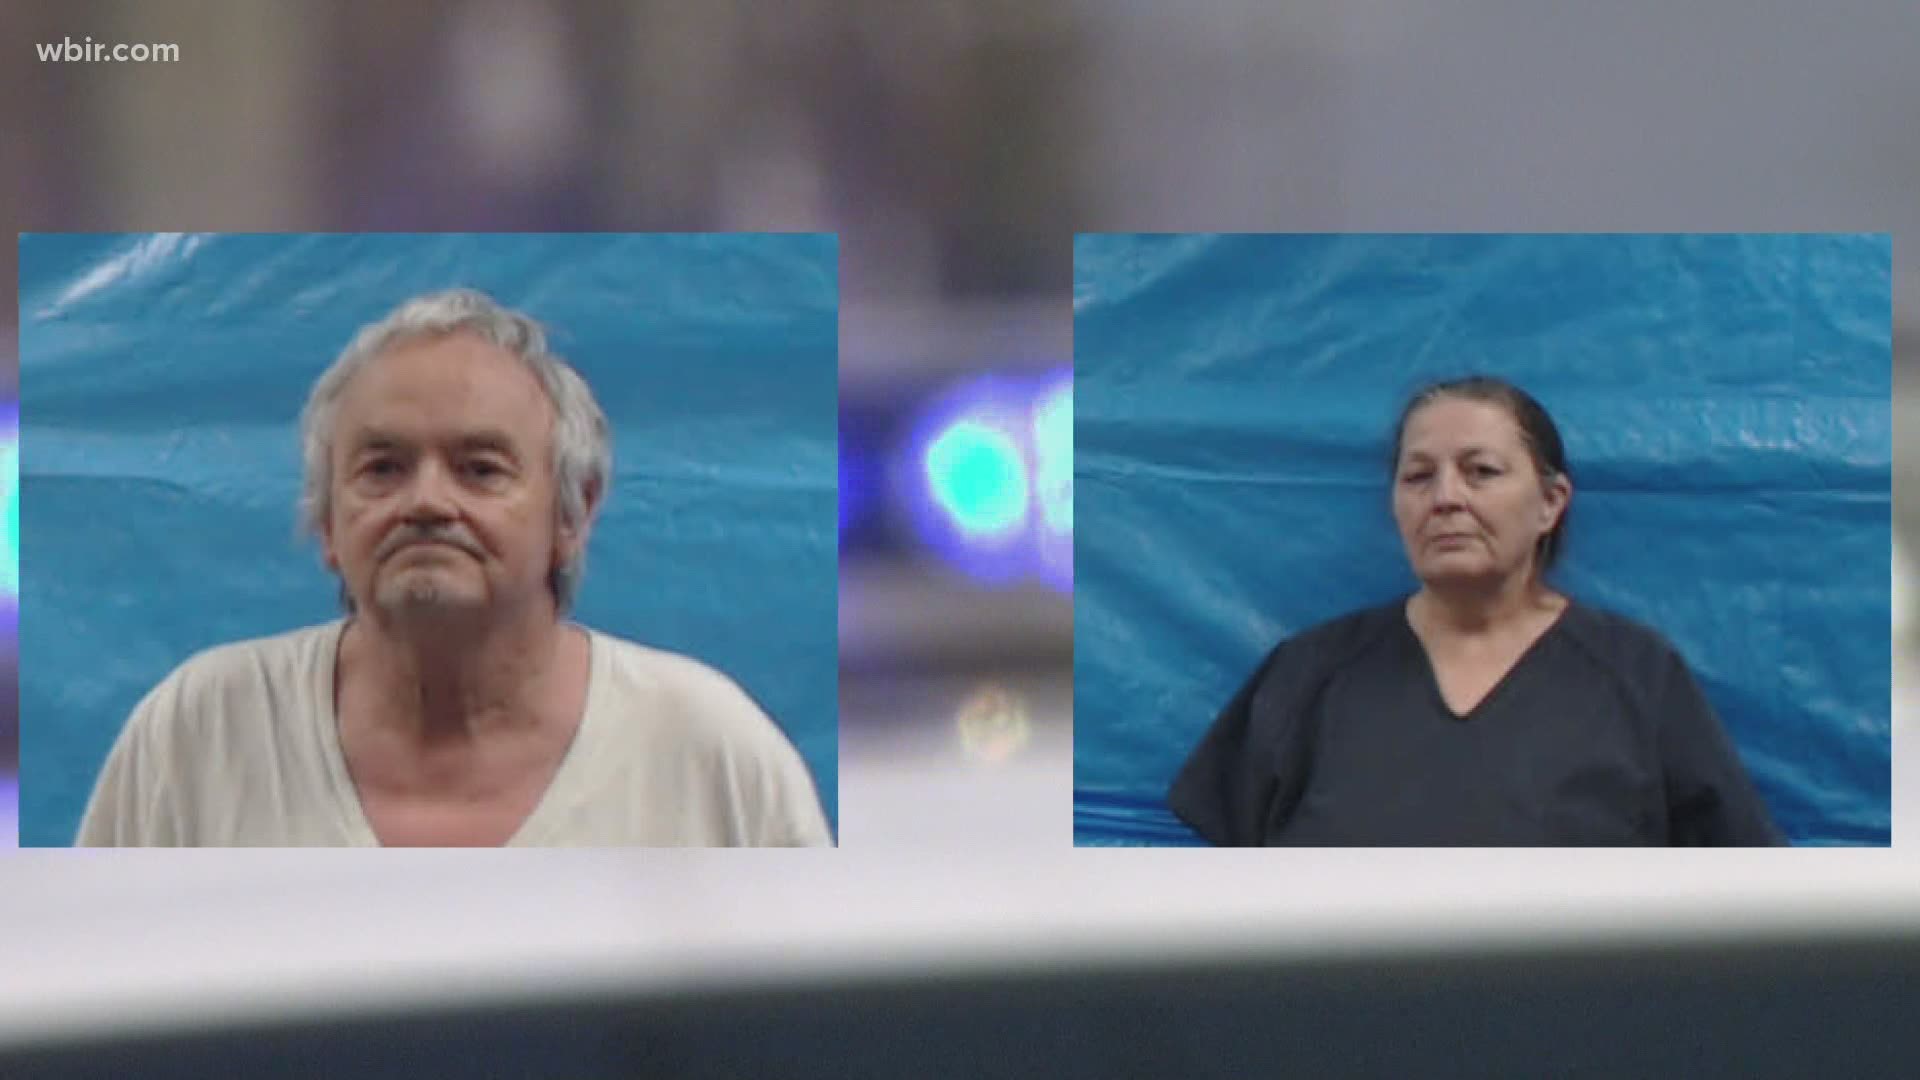 We're uncovering new payments from the state to a Roane County couple investigators said locked up and starved their five adoptive children.